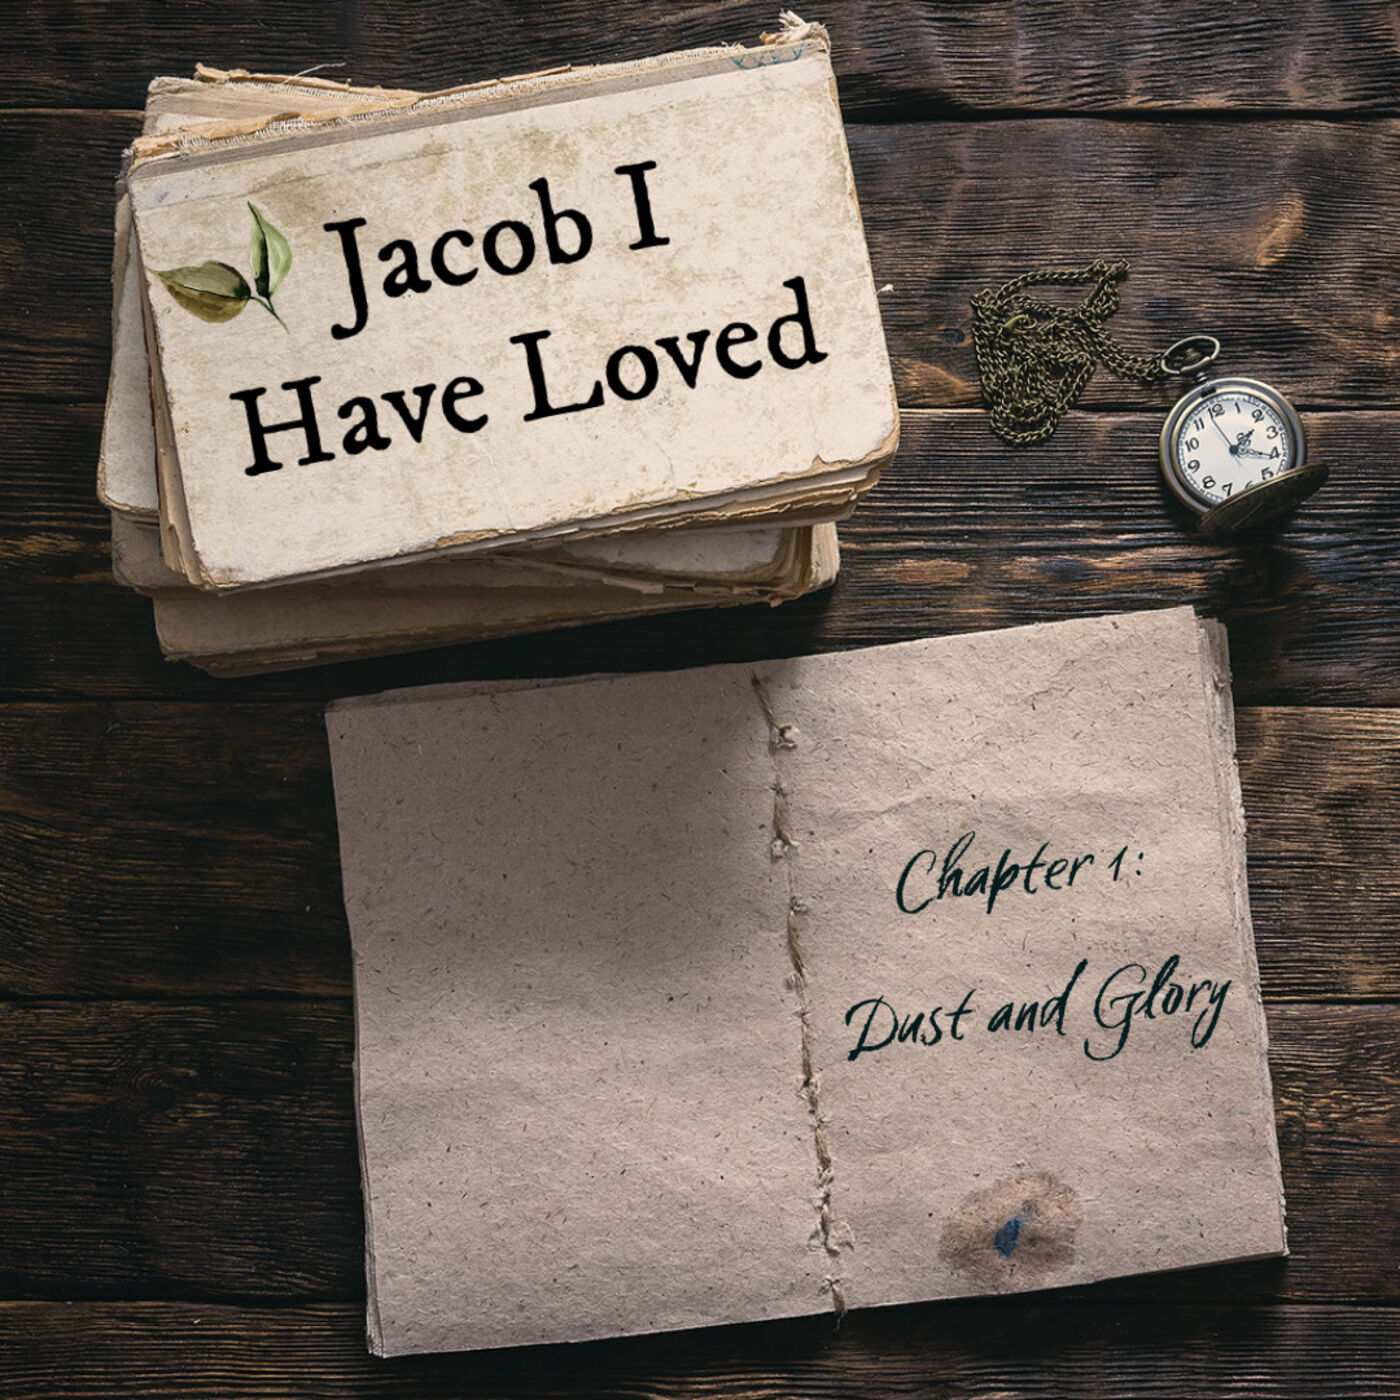 Jacob I Have Loved Audiobook Chapter 1: Dust and Glory